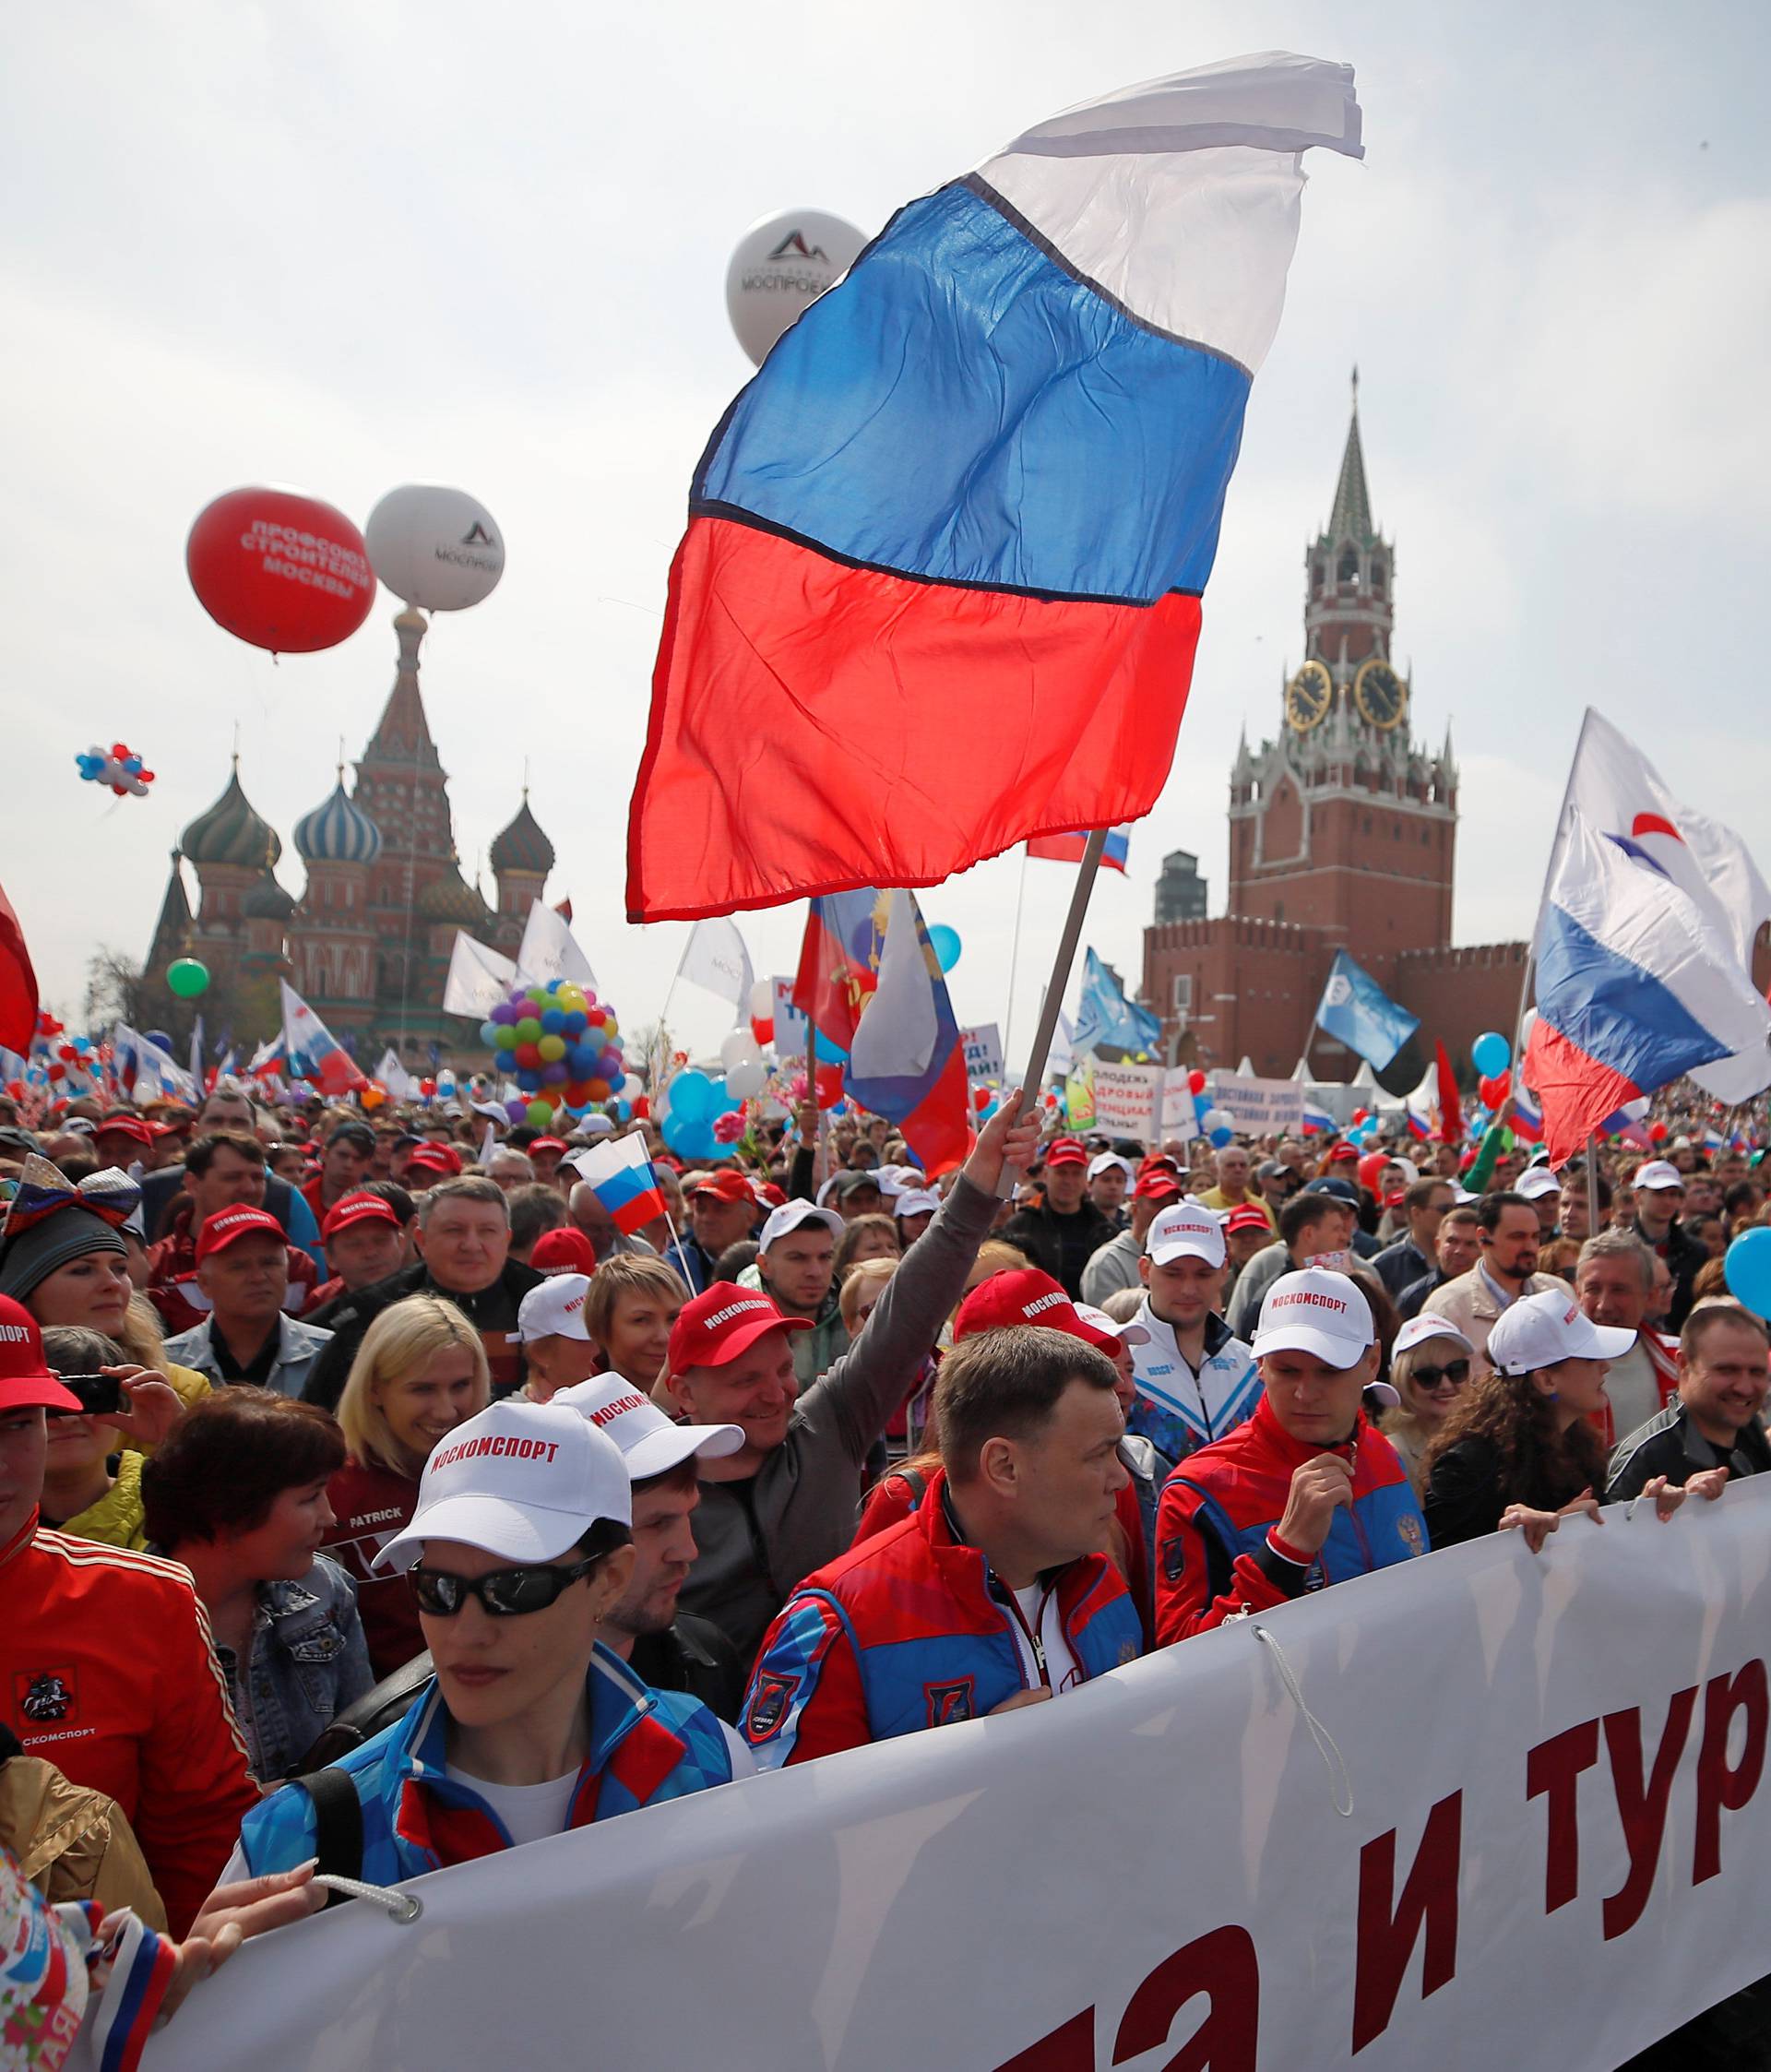 People attend a May Day rally at Red Square in Moscow